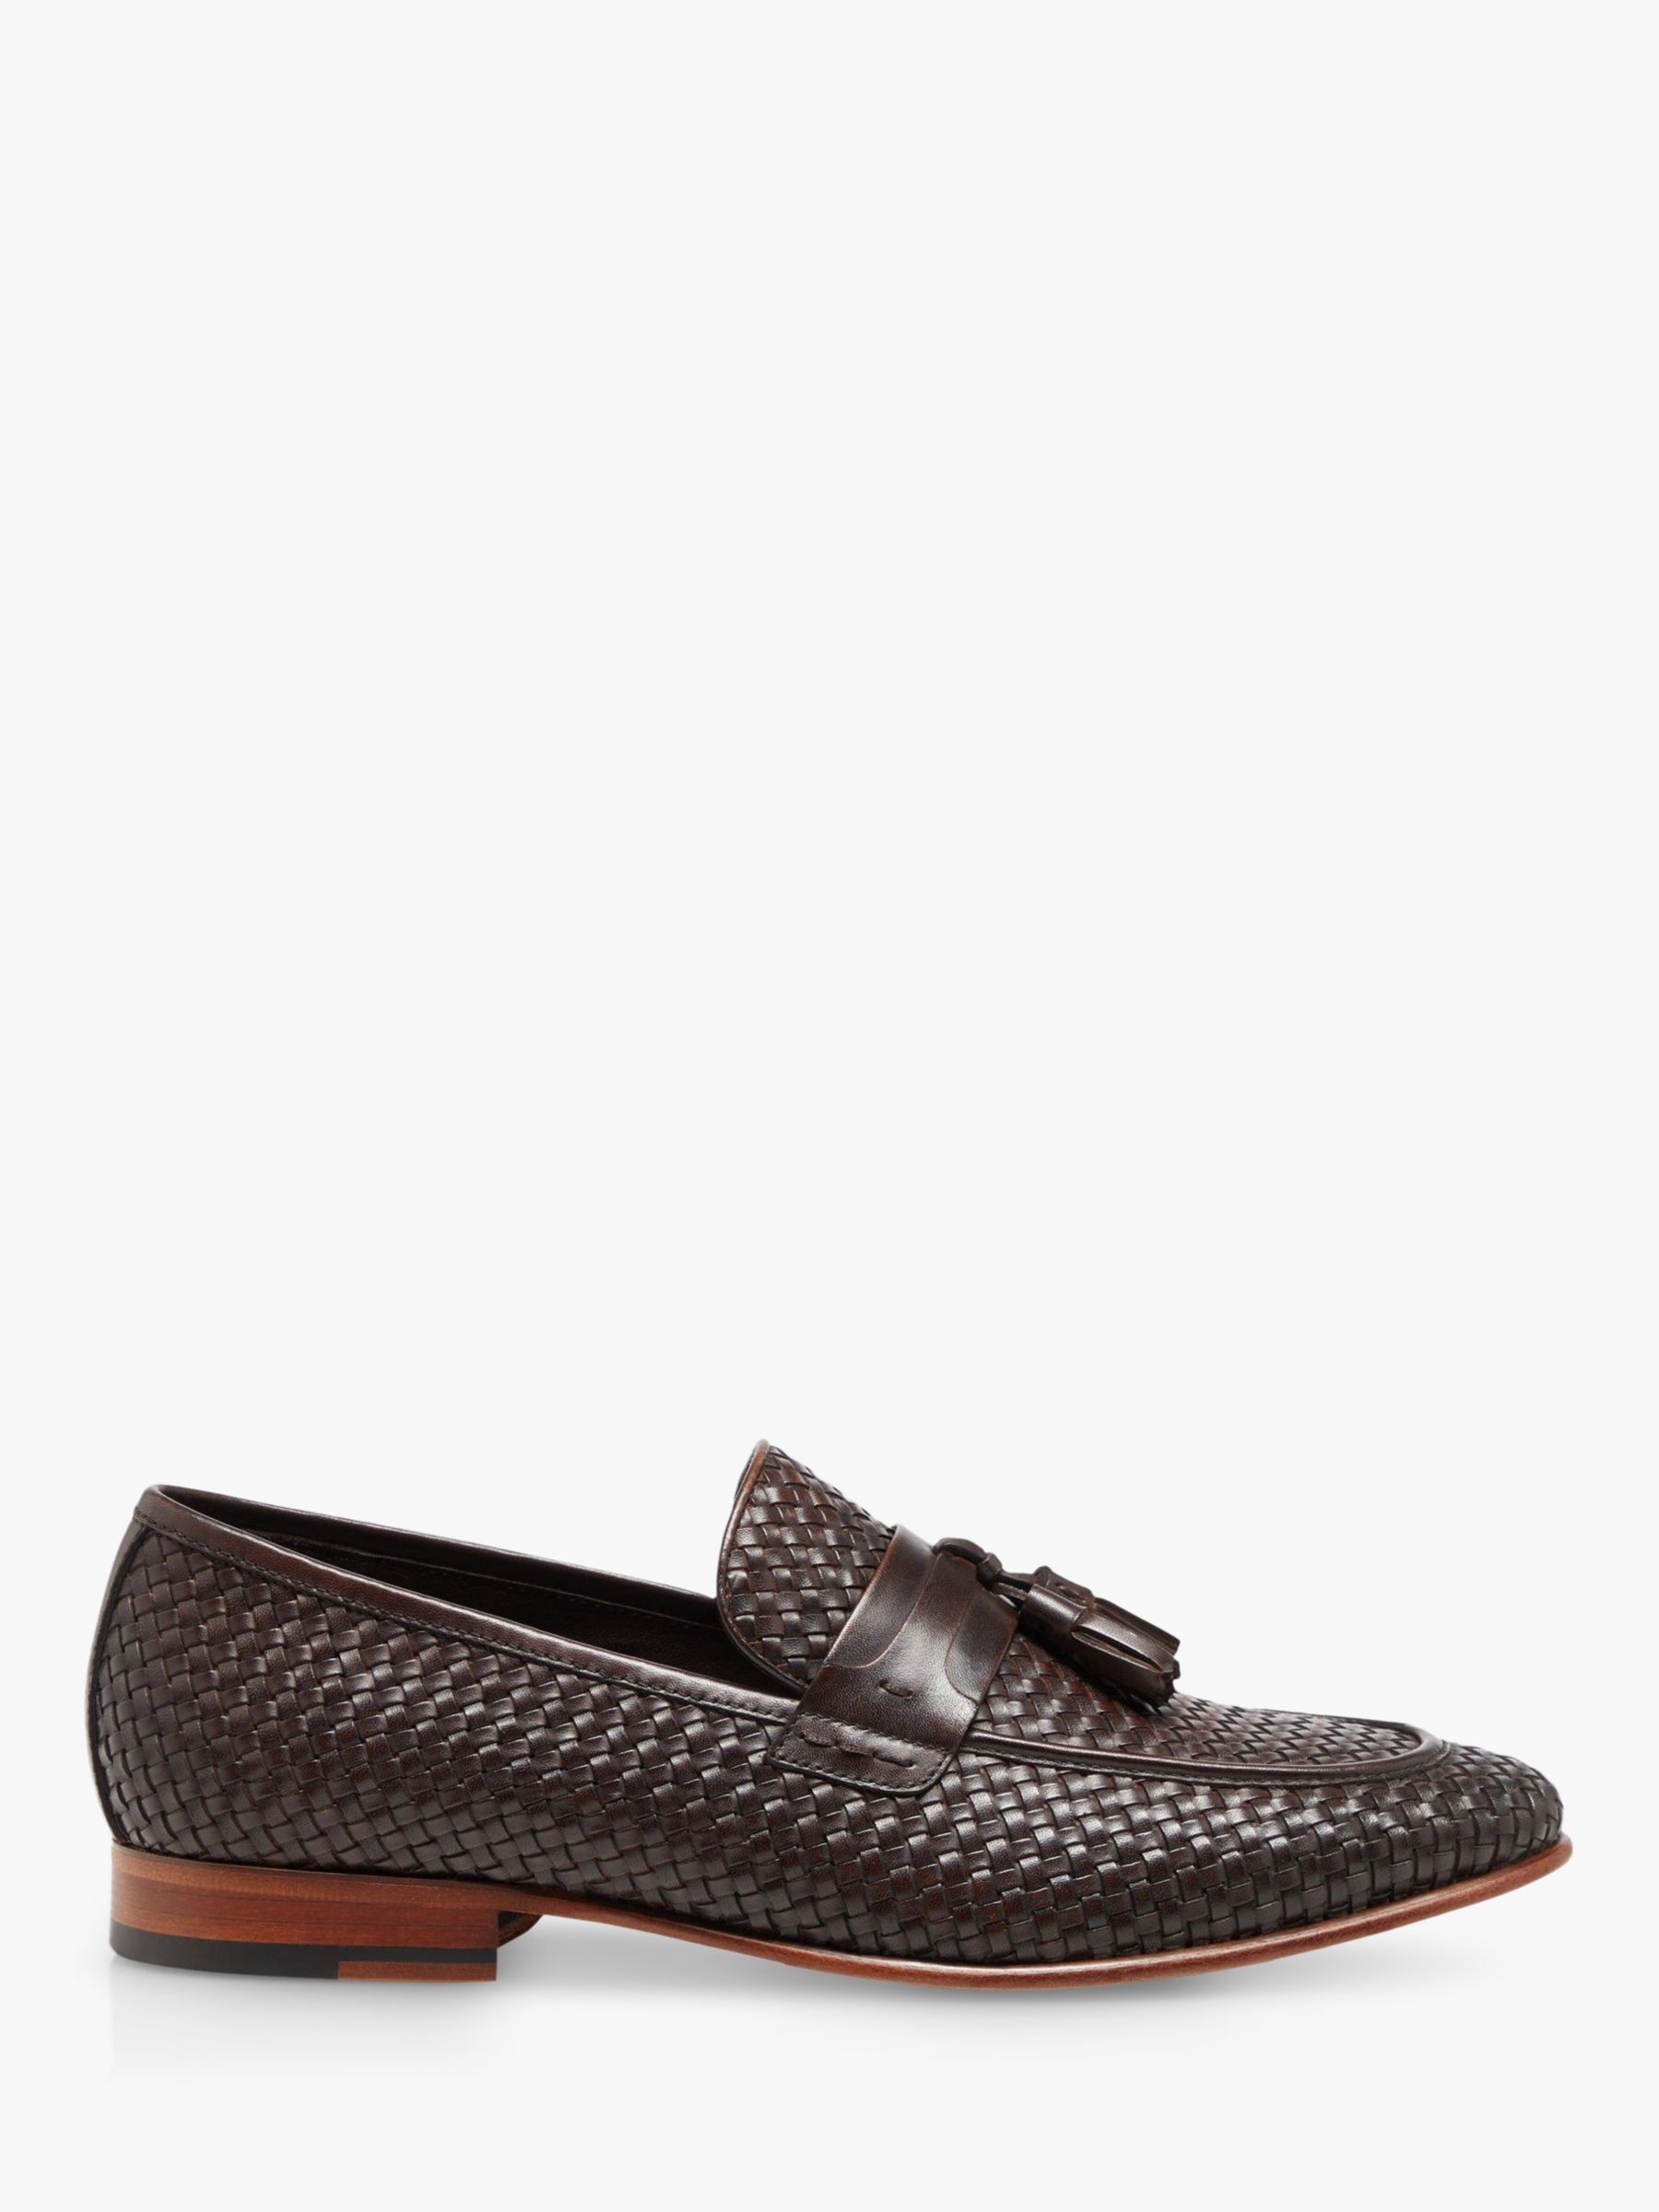 Dune Stanleys Leather Woven Loafers, Brown at John Lewis & Partners